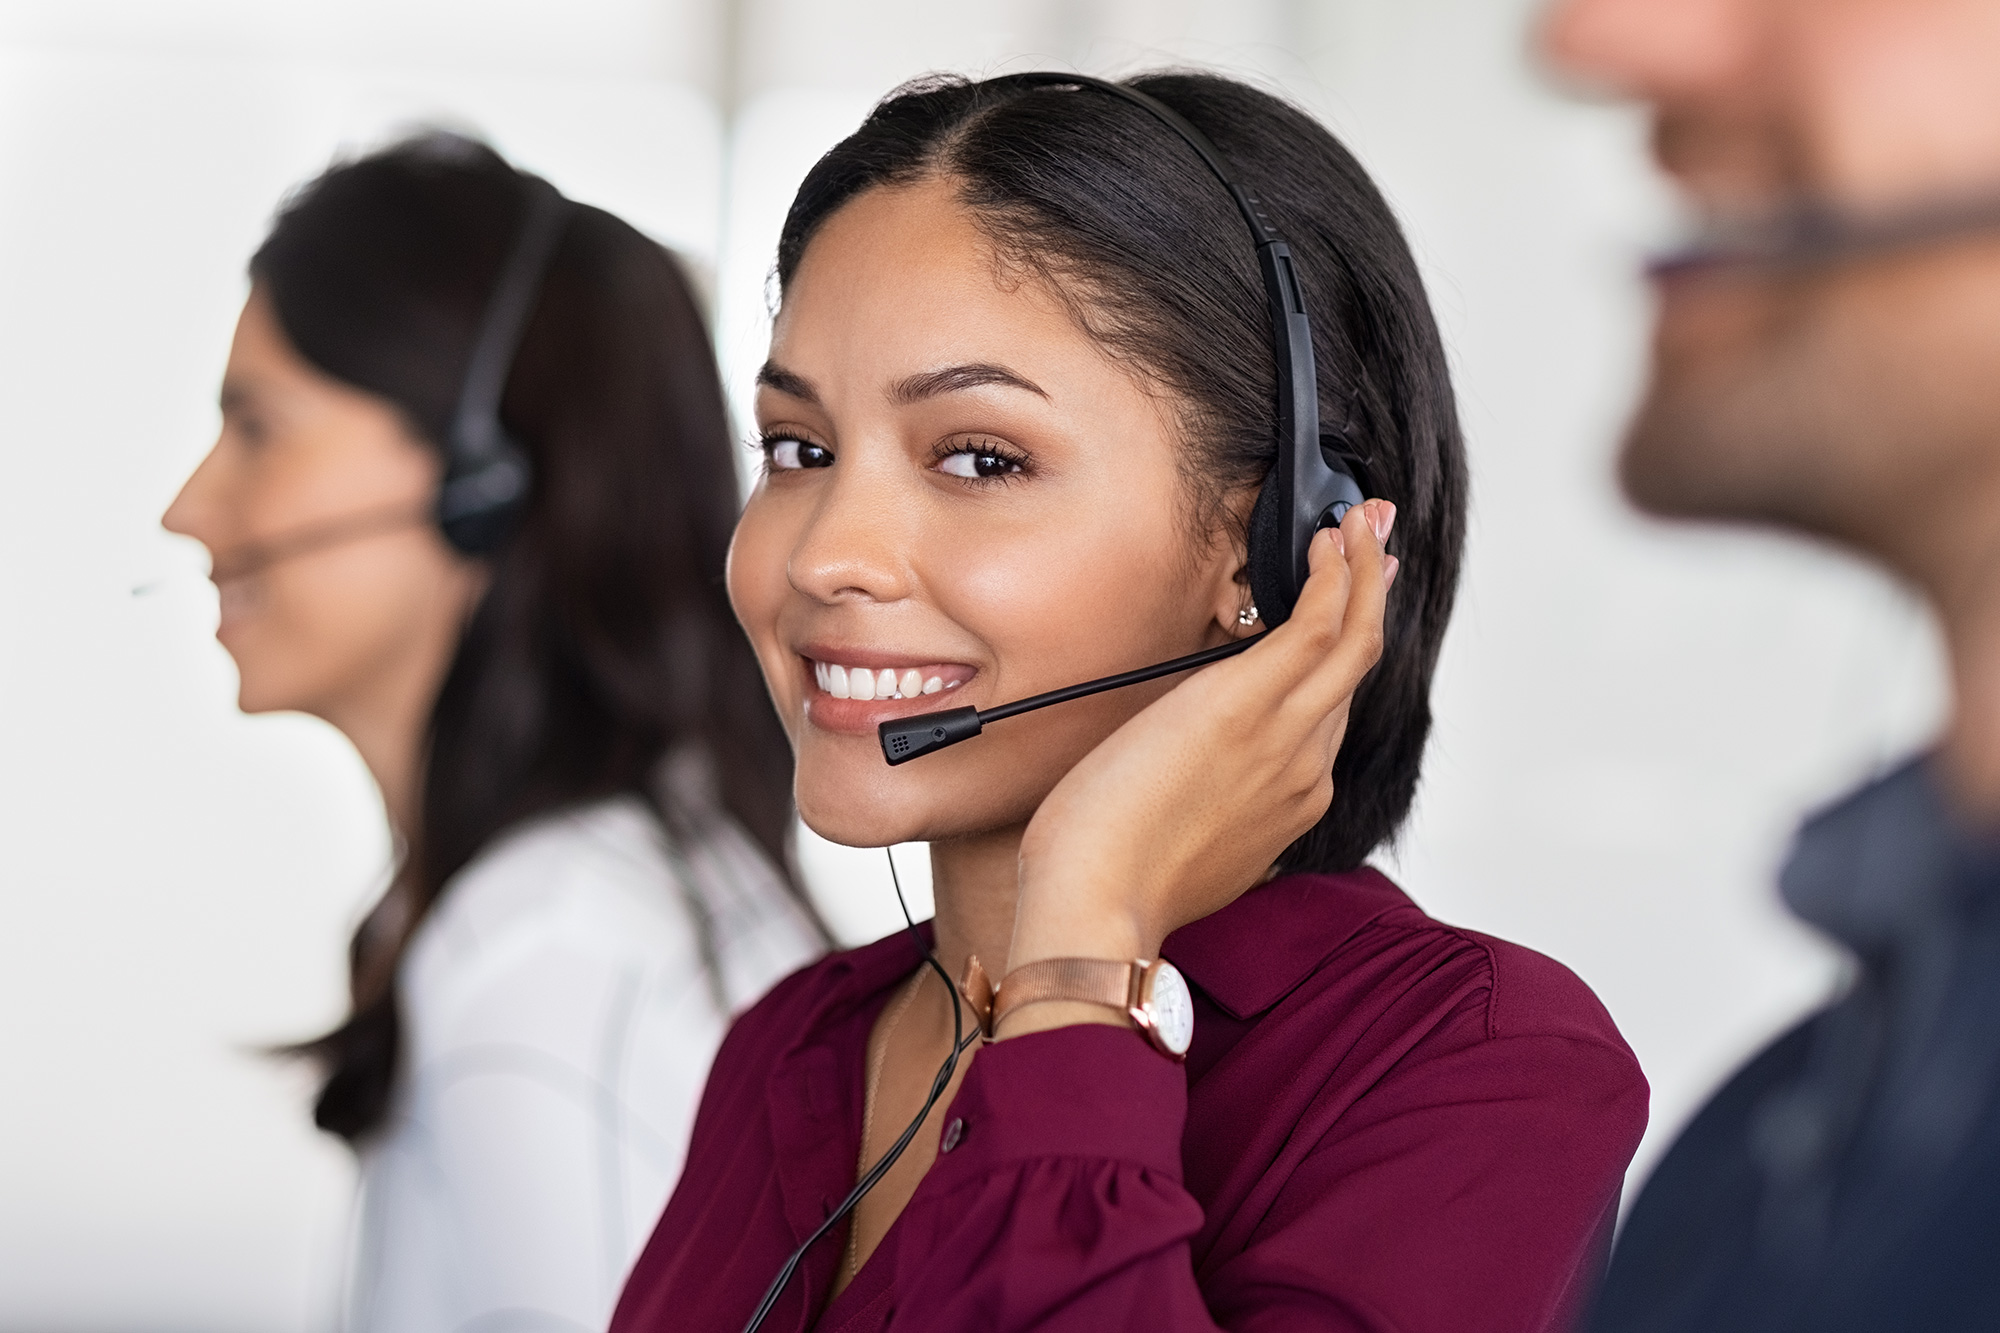 A customer service representative in a headset looks at the camera and smiles.